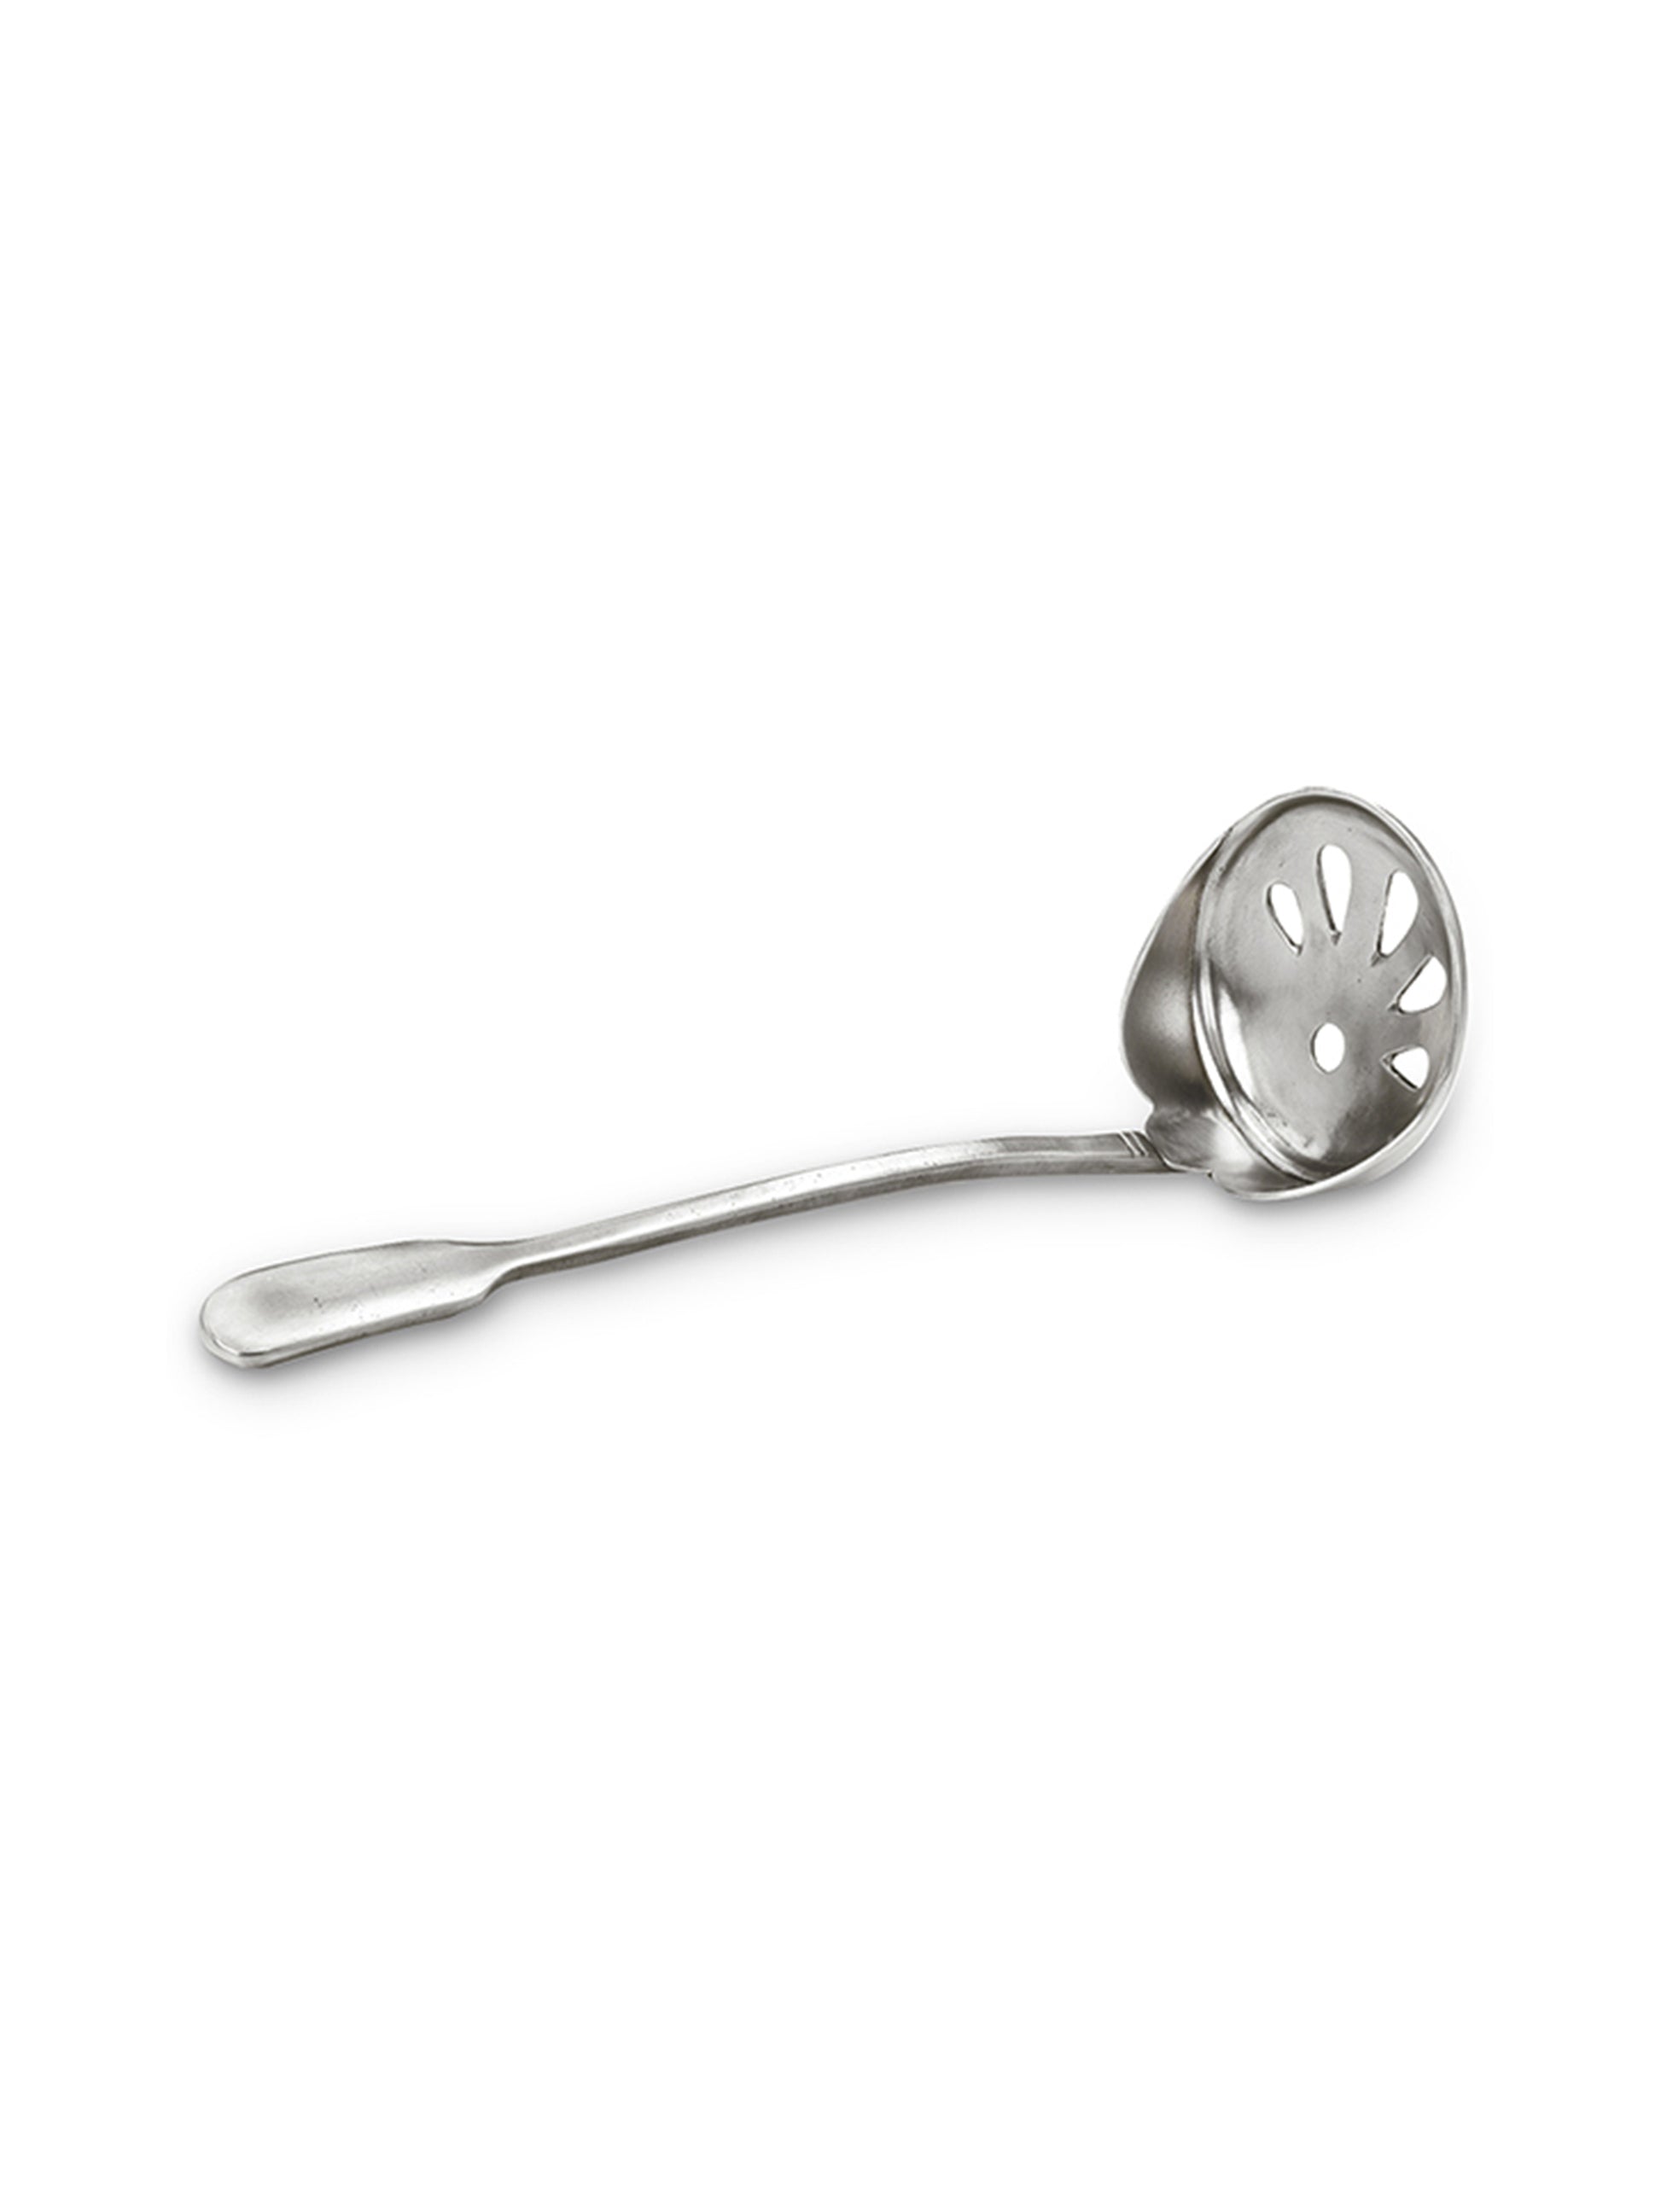 MATCH Pewter Ice Scoop Weston Table